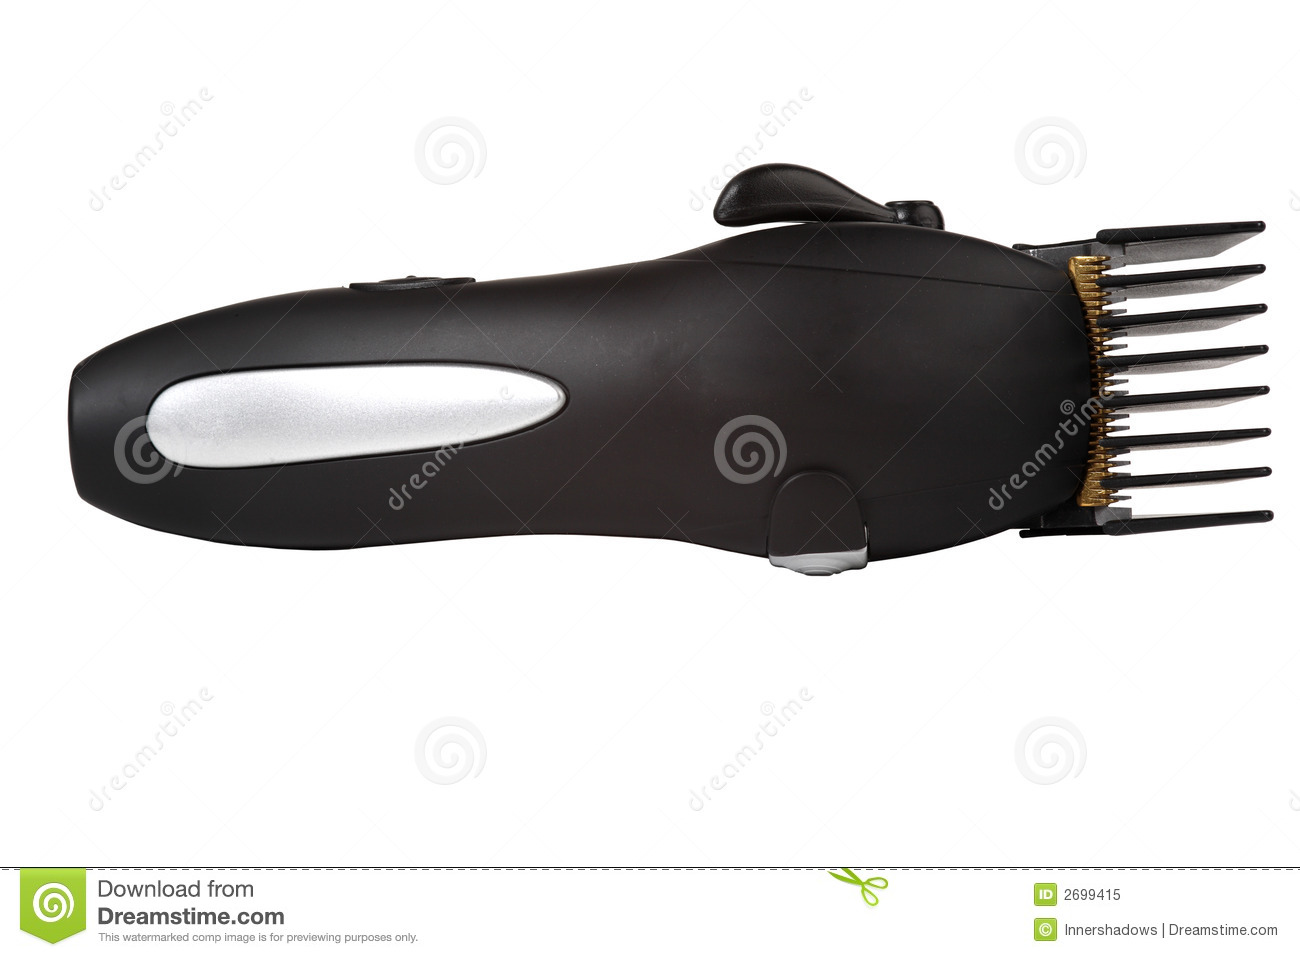 Hair Clippers Royalty Free Stock Photo   Image  2699415